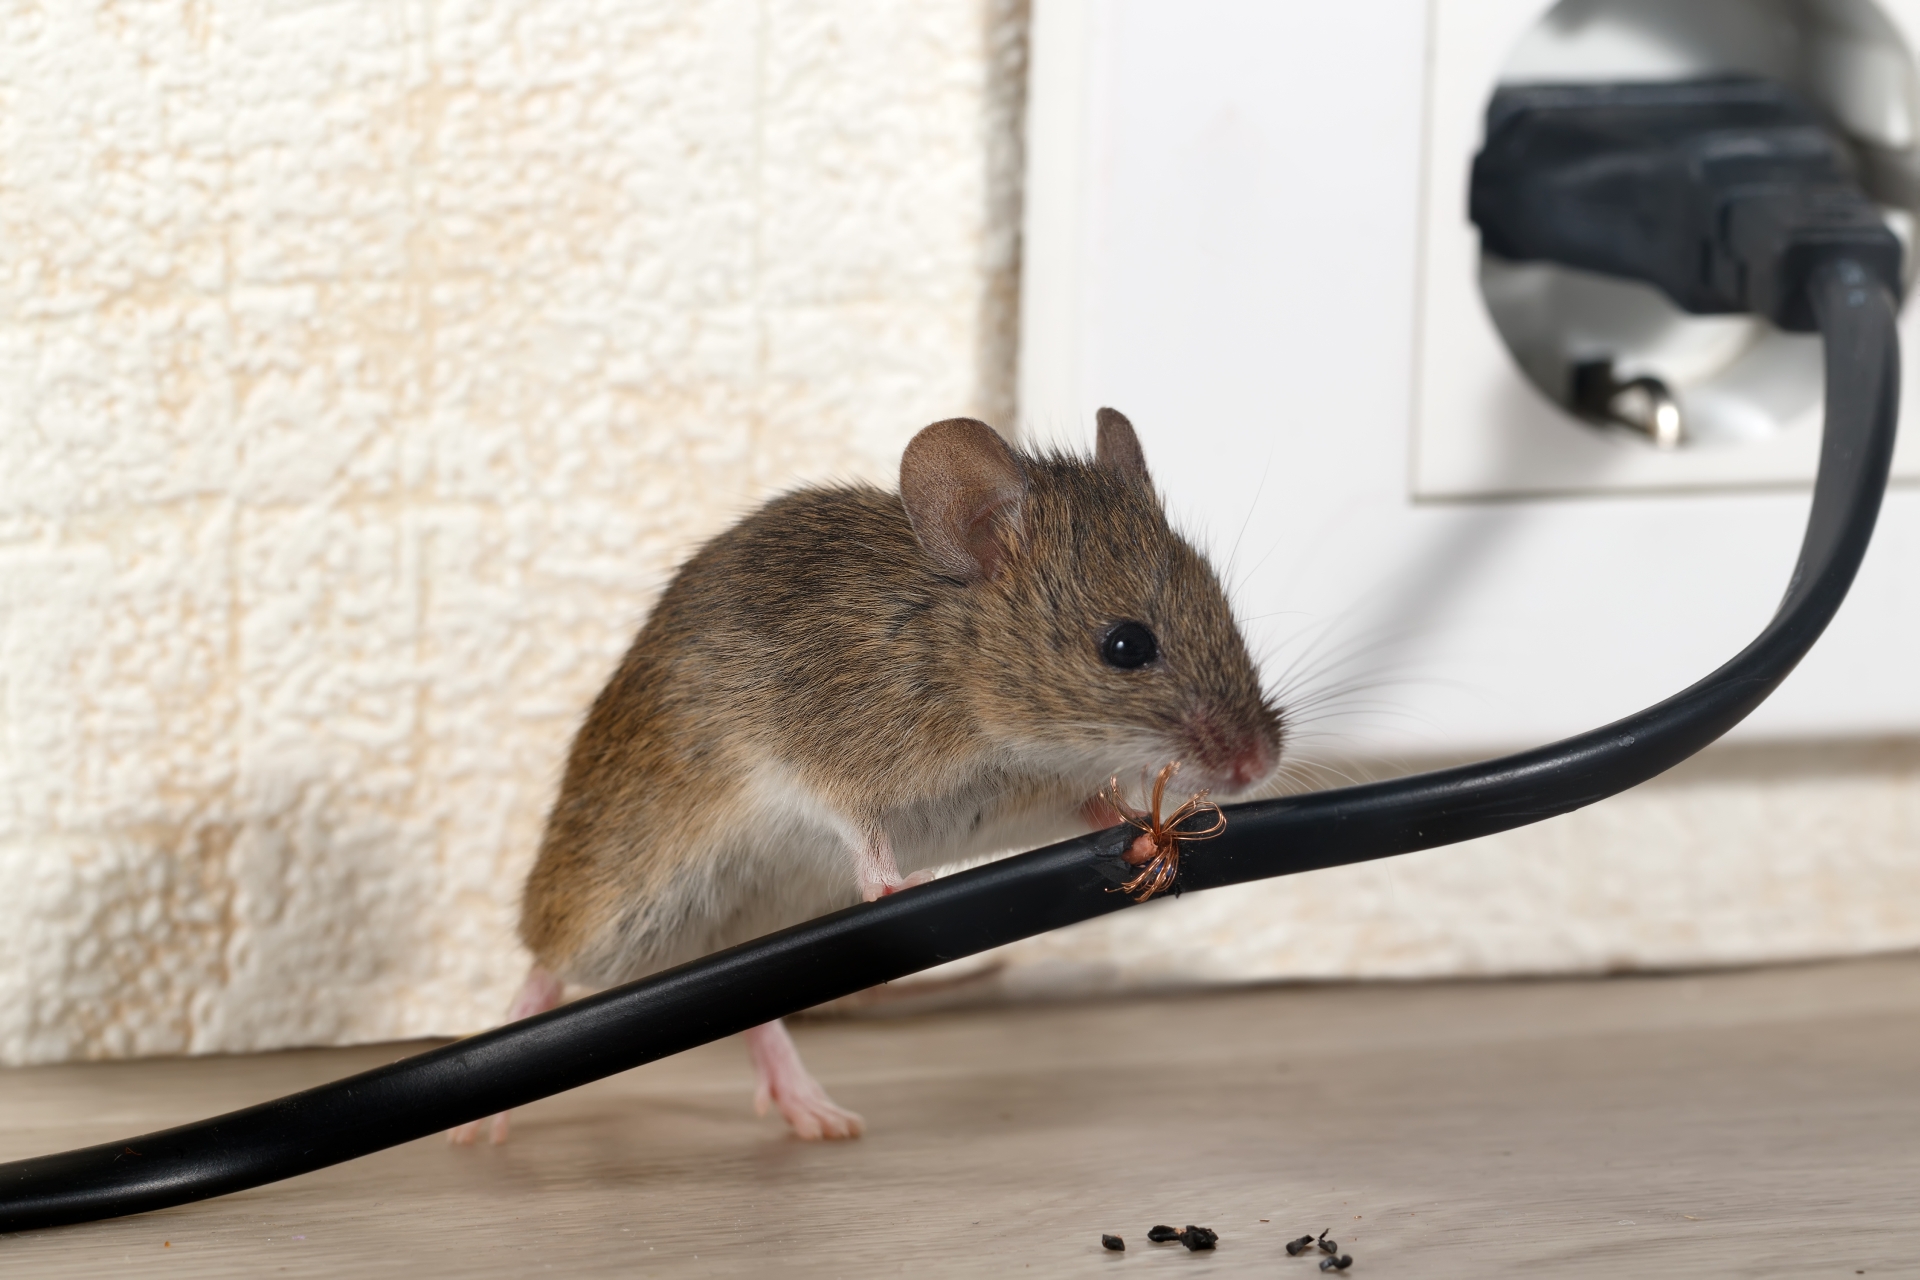 Mice Infestation, Pest Control in Swanley, Hextable, Crockenhill, BR8. Call Now 020 8166 9746